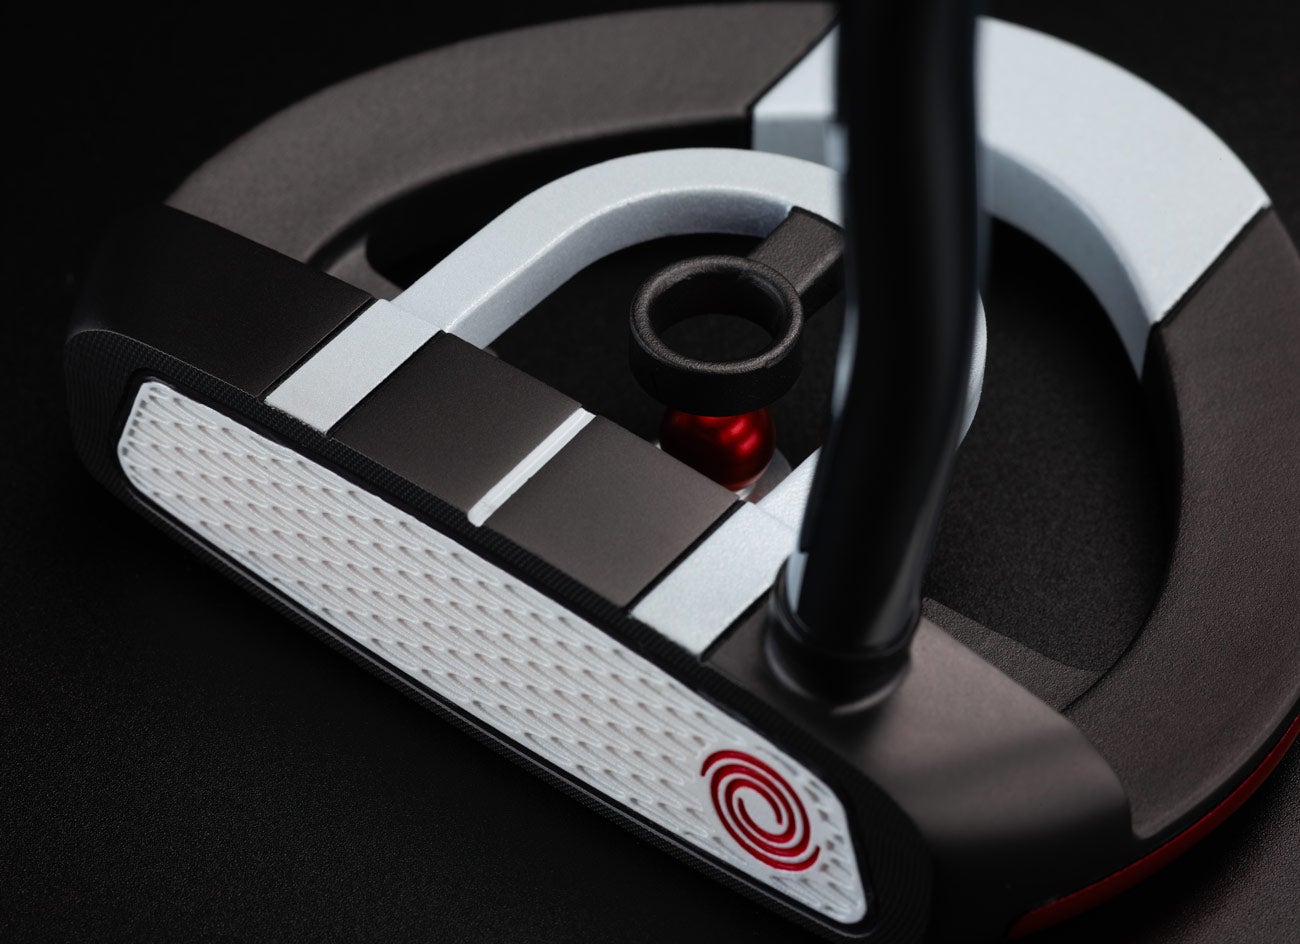 The Odyssey Red Ball putter